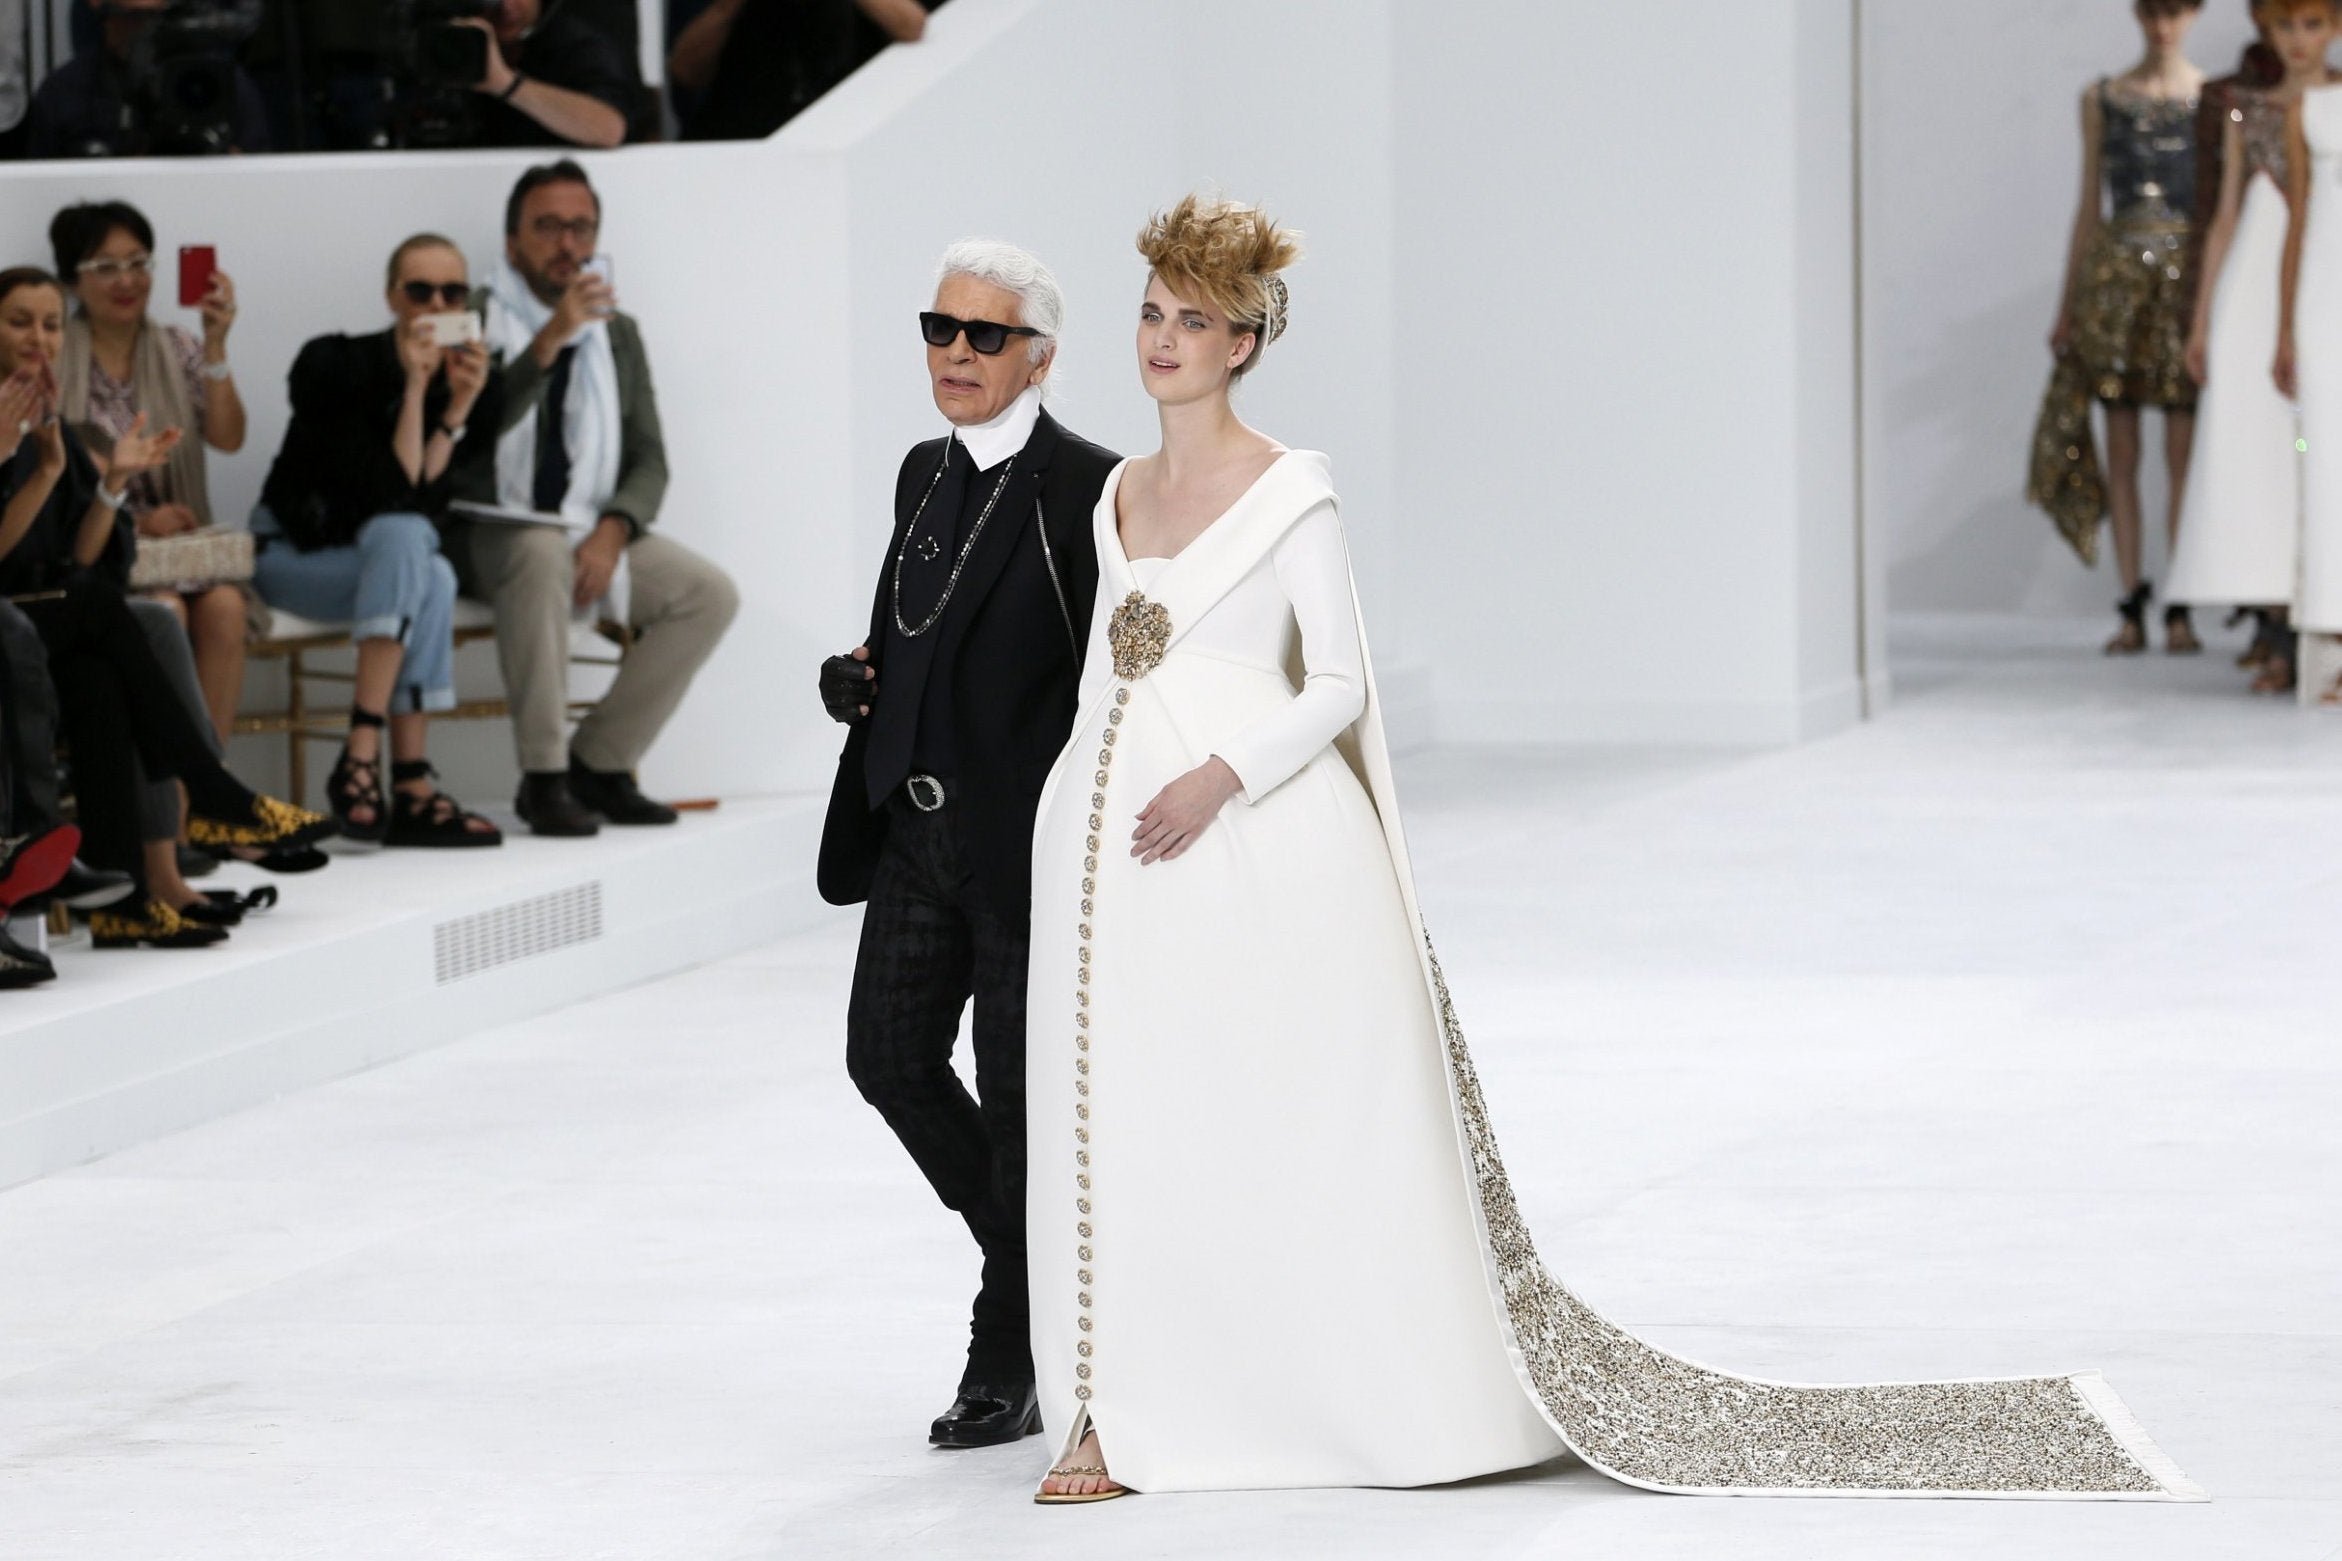 Karl Lagerfeld the supermodels the extremes and the reinvention of Chanel   South China Morning Post